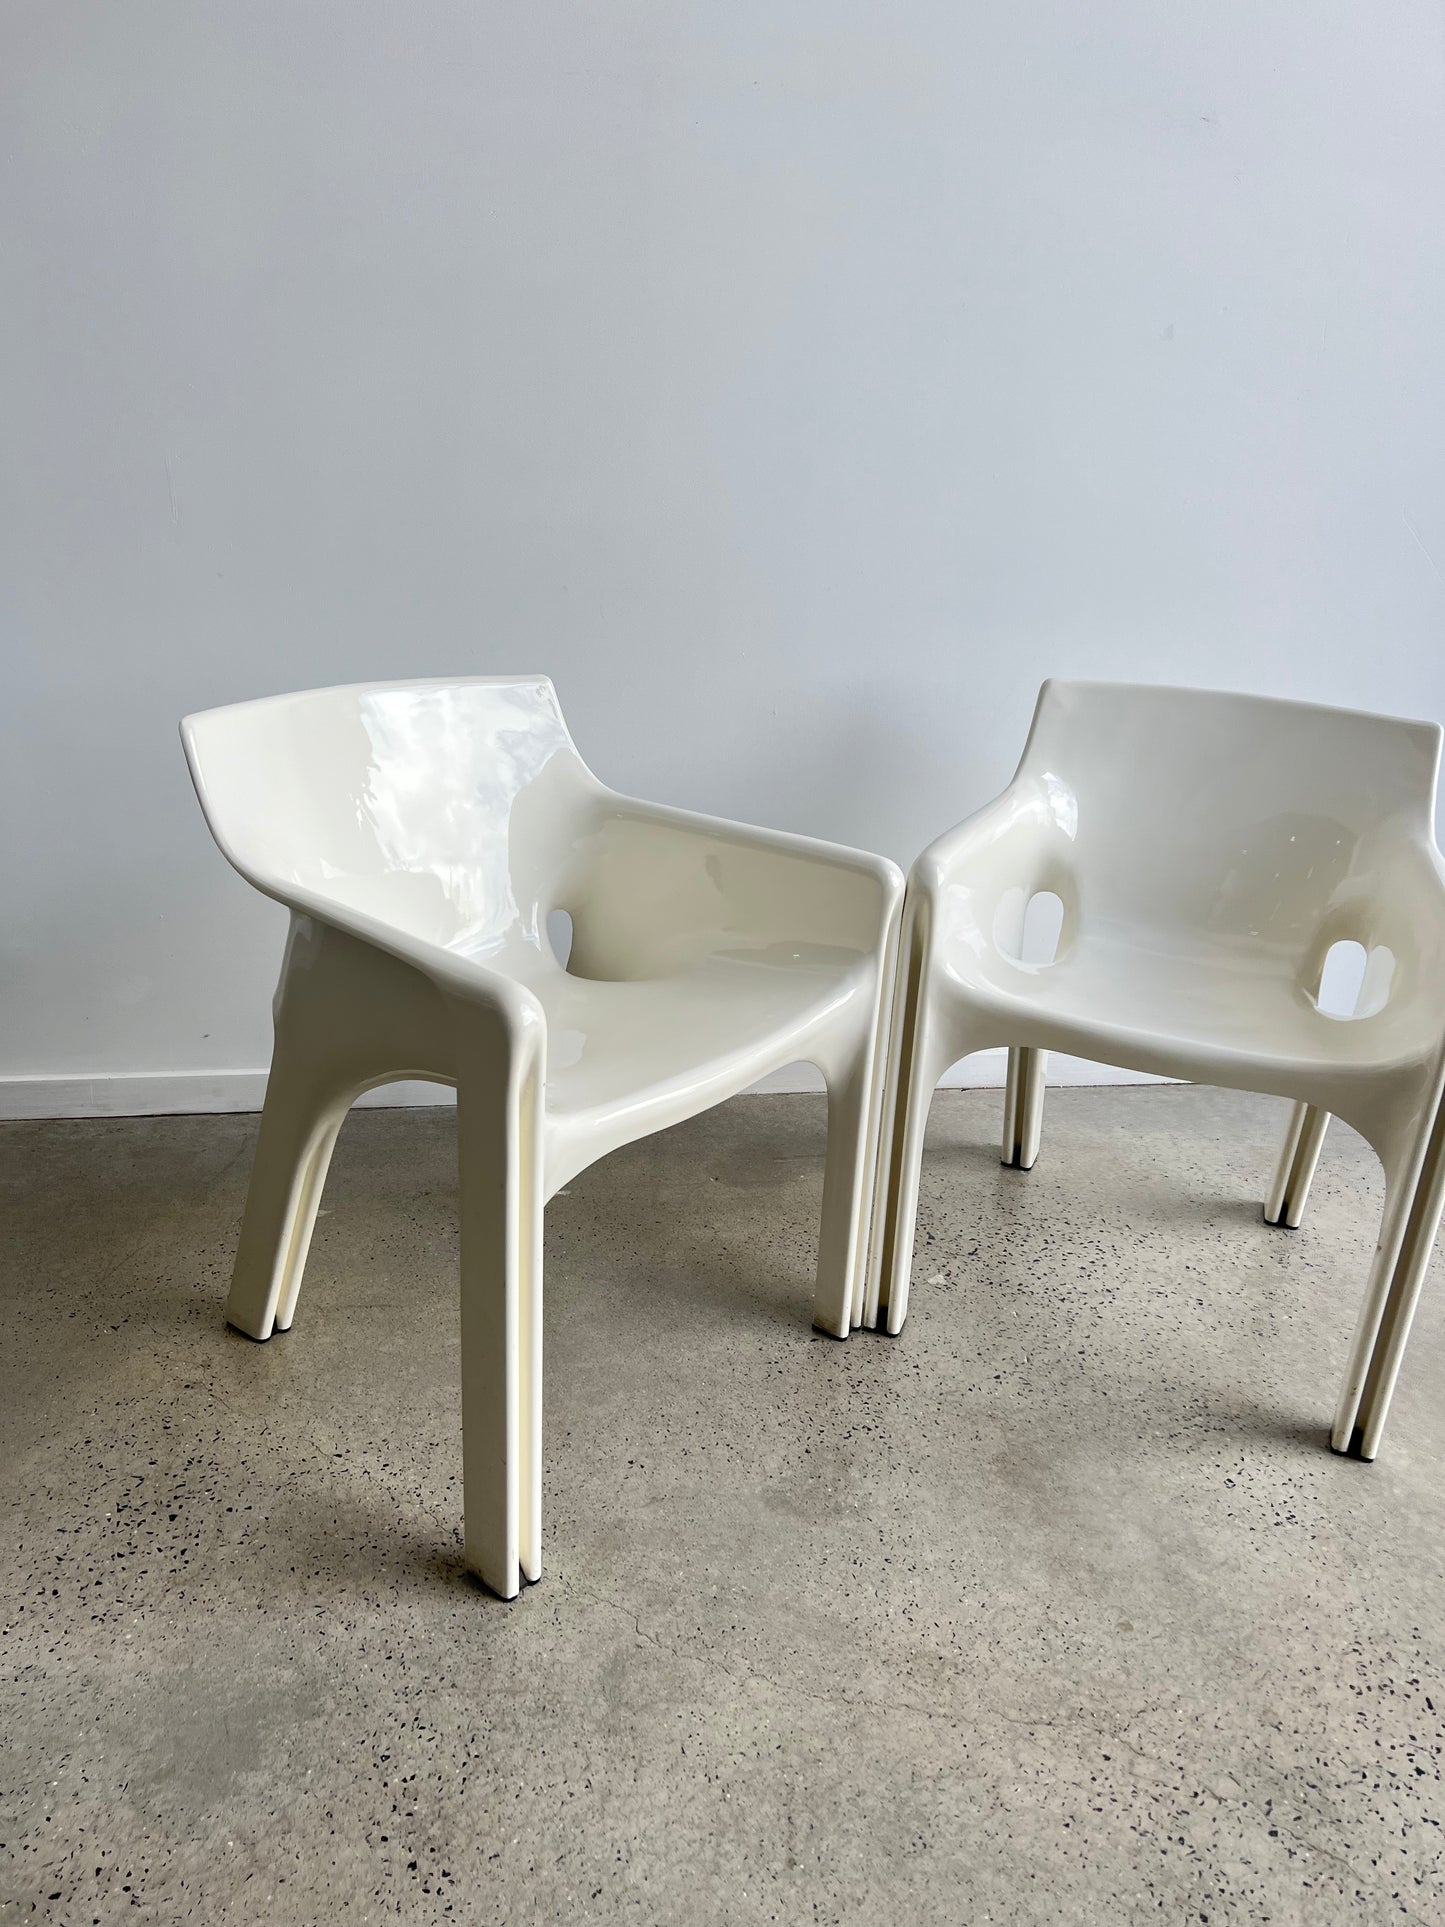 "Gaudi" Chairs by Vico Magistretti for Artemide, 1970s